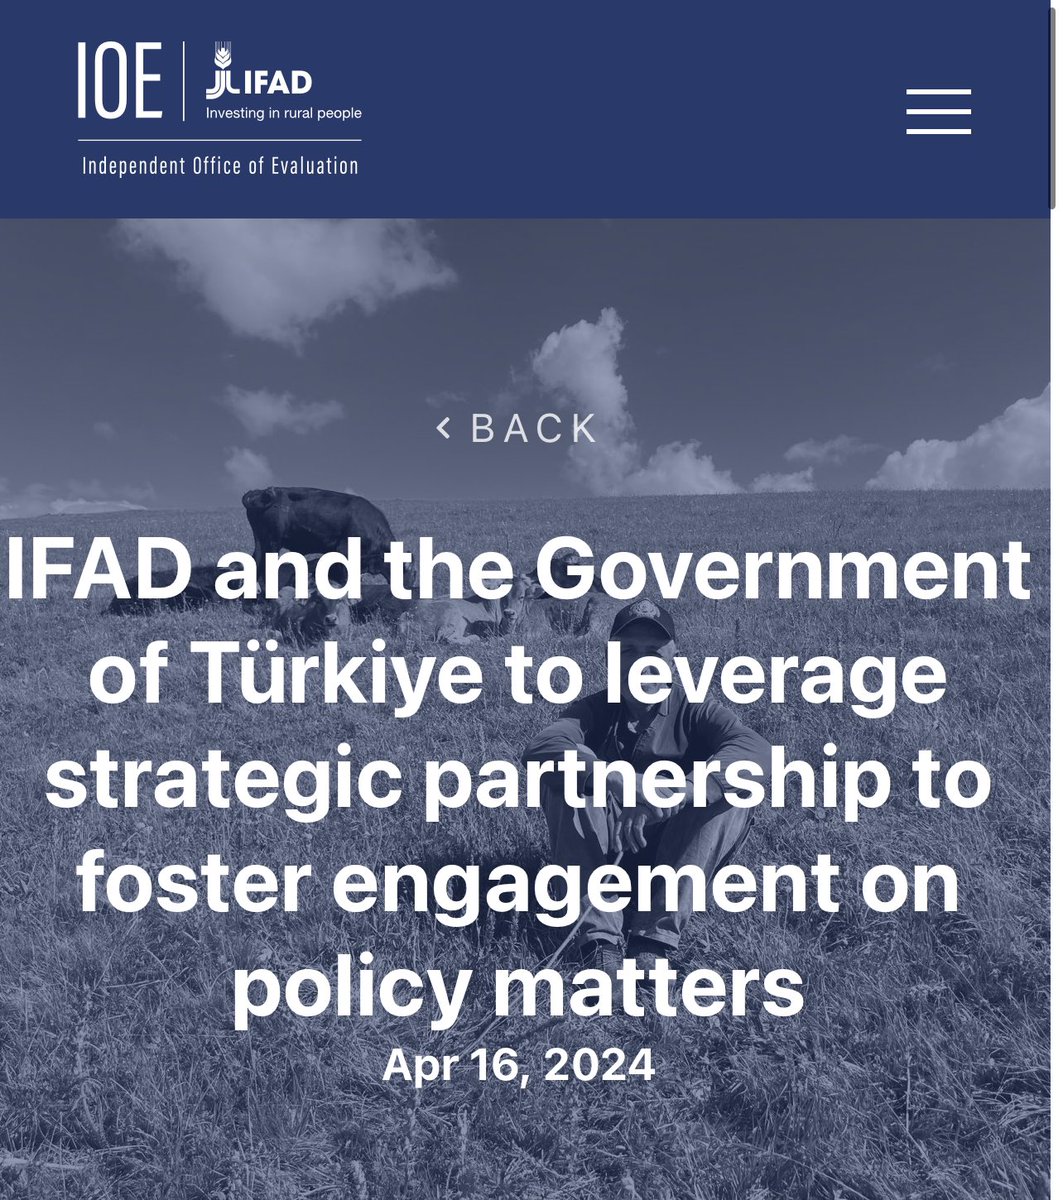 IFAD and the Government of Türkiye to leverage strategic partnership to foster engagement on policy matters. Learn more in the news item on the CSPE final workshop now: bit.ly/449BW3y